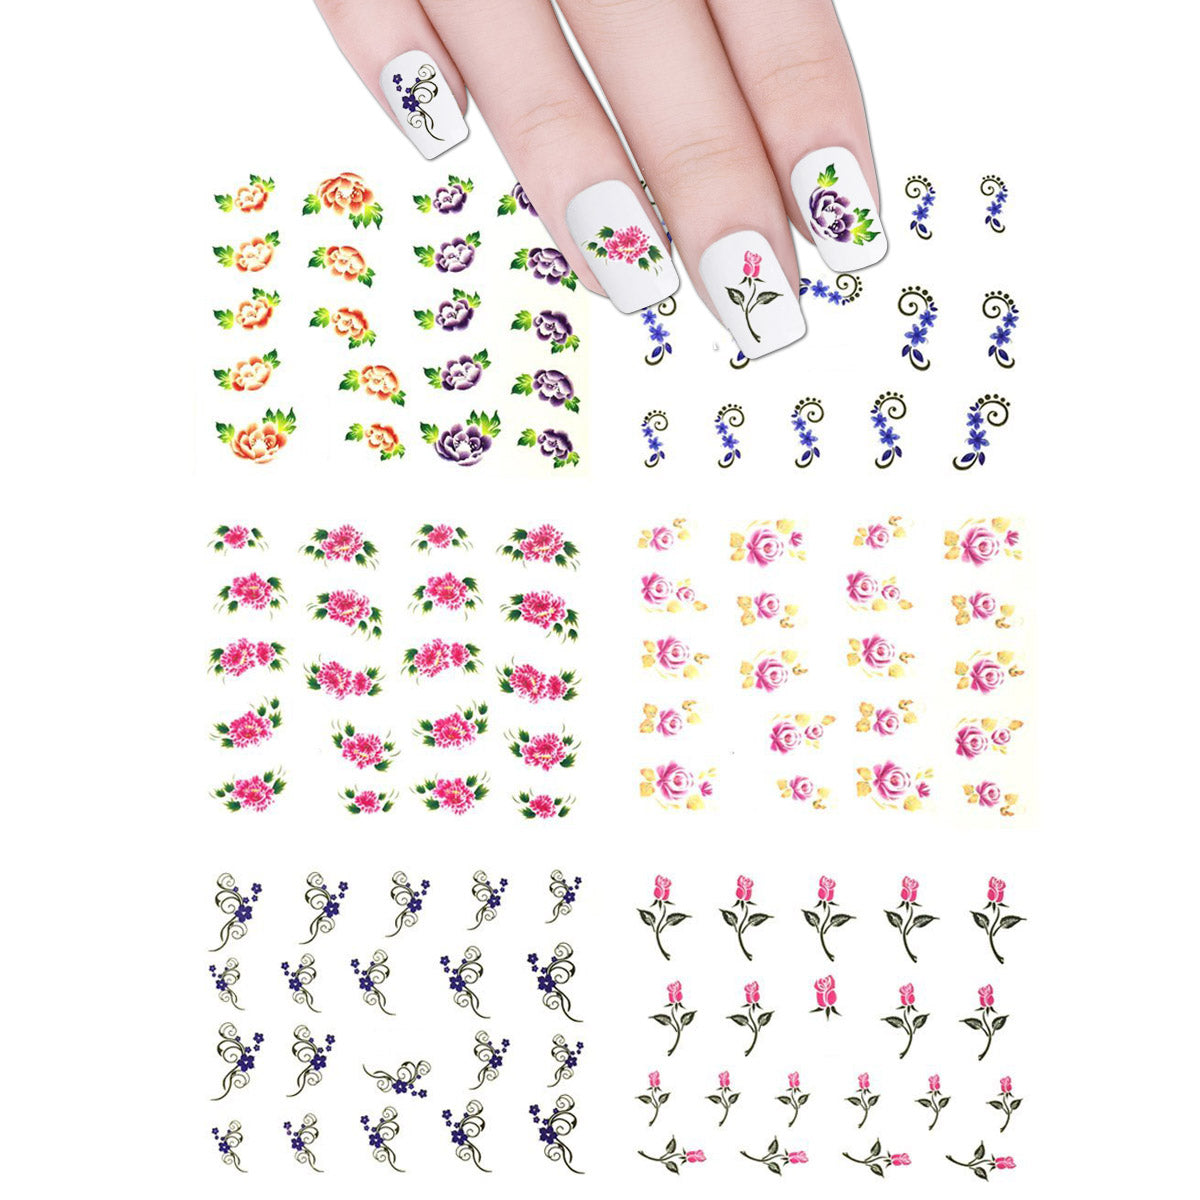 Best Nail Designs with Nail Stickers for Beginners - I Love My Polish